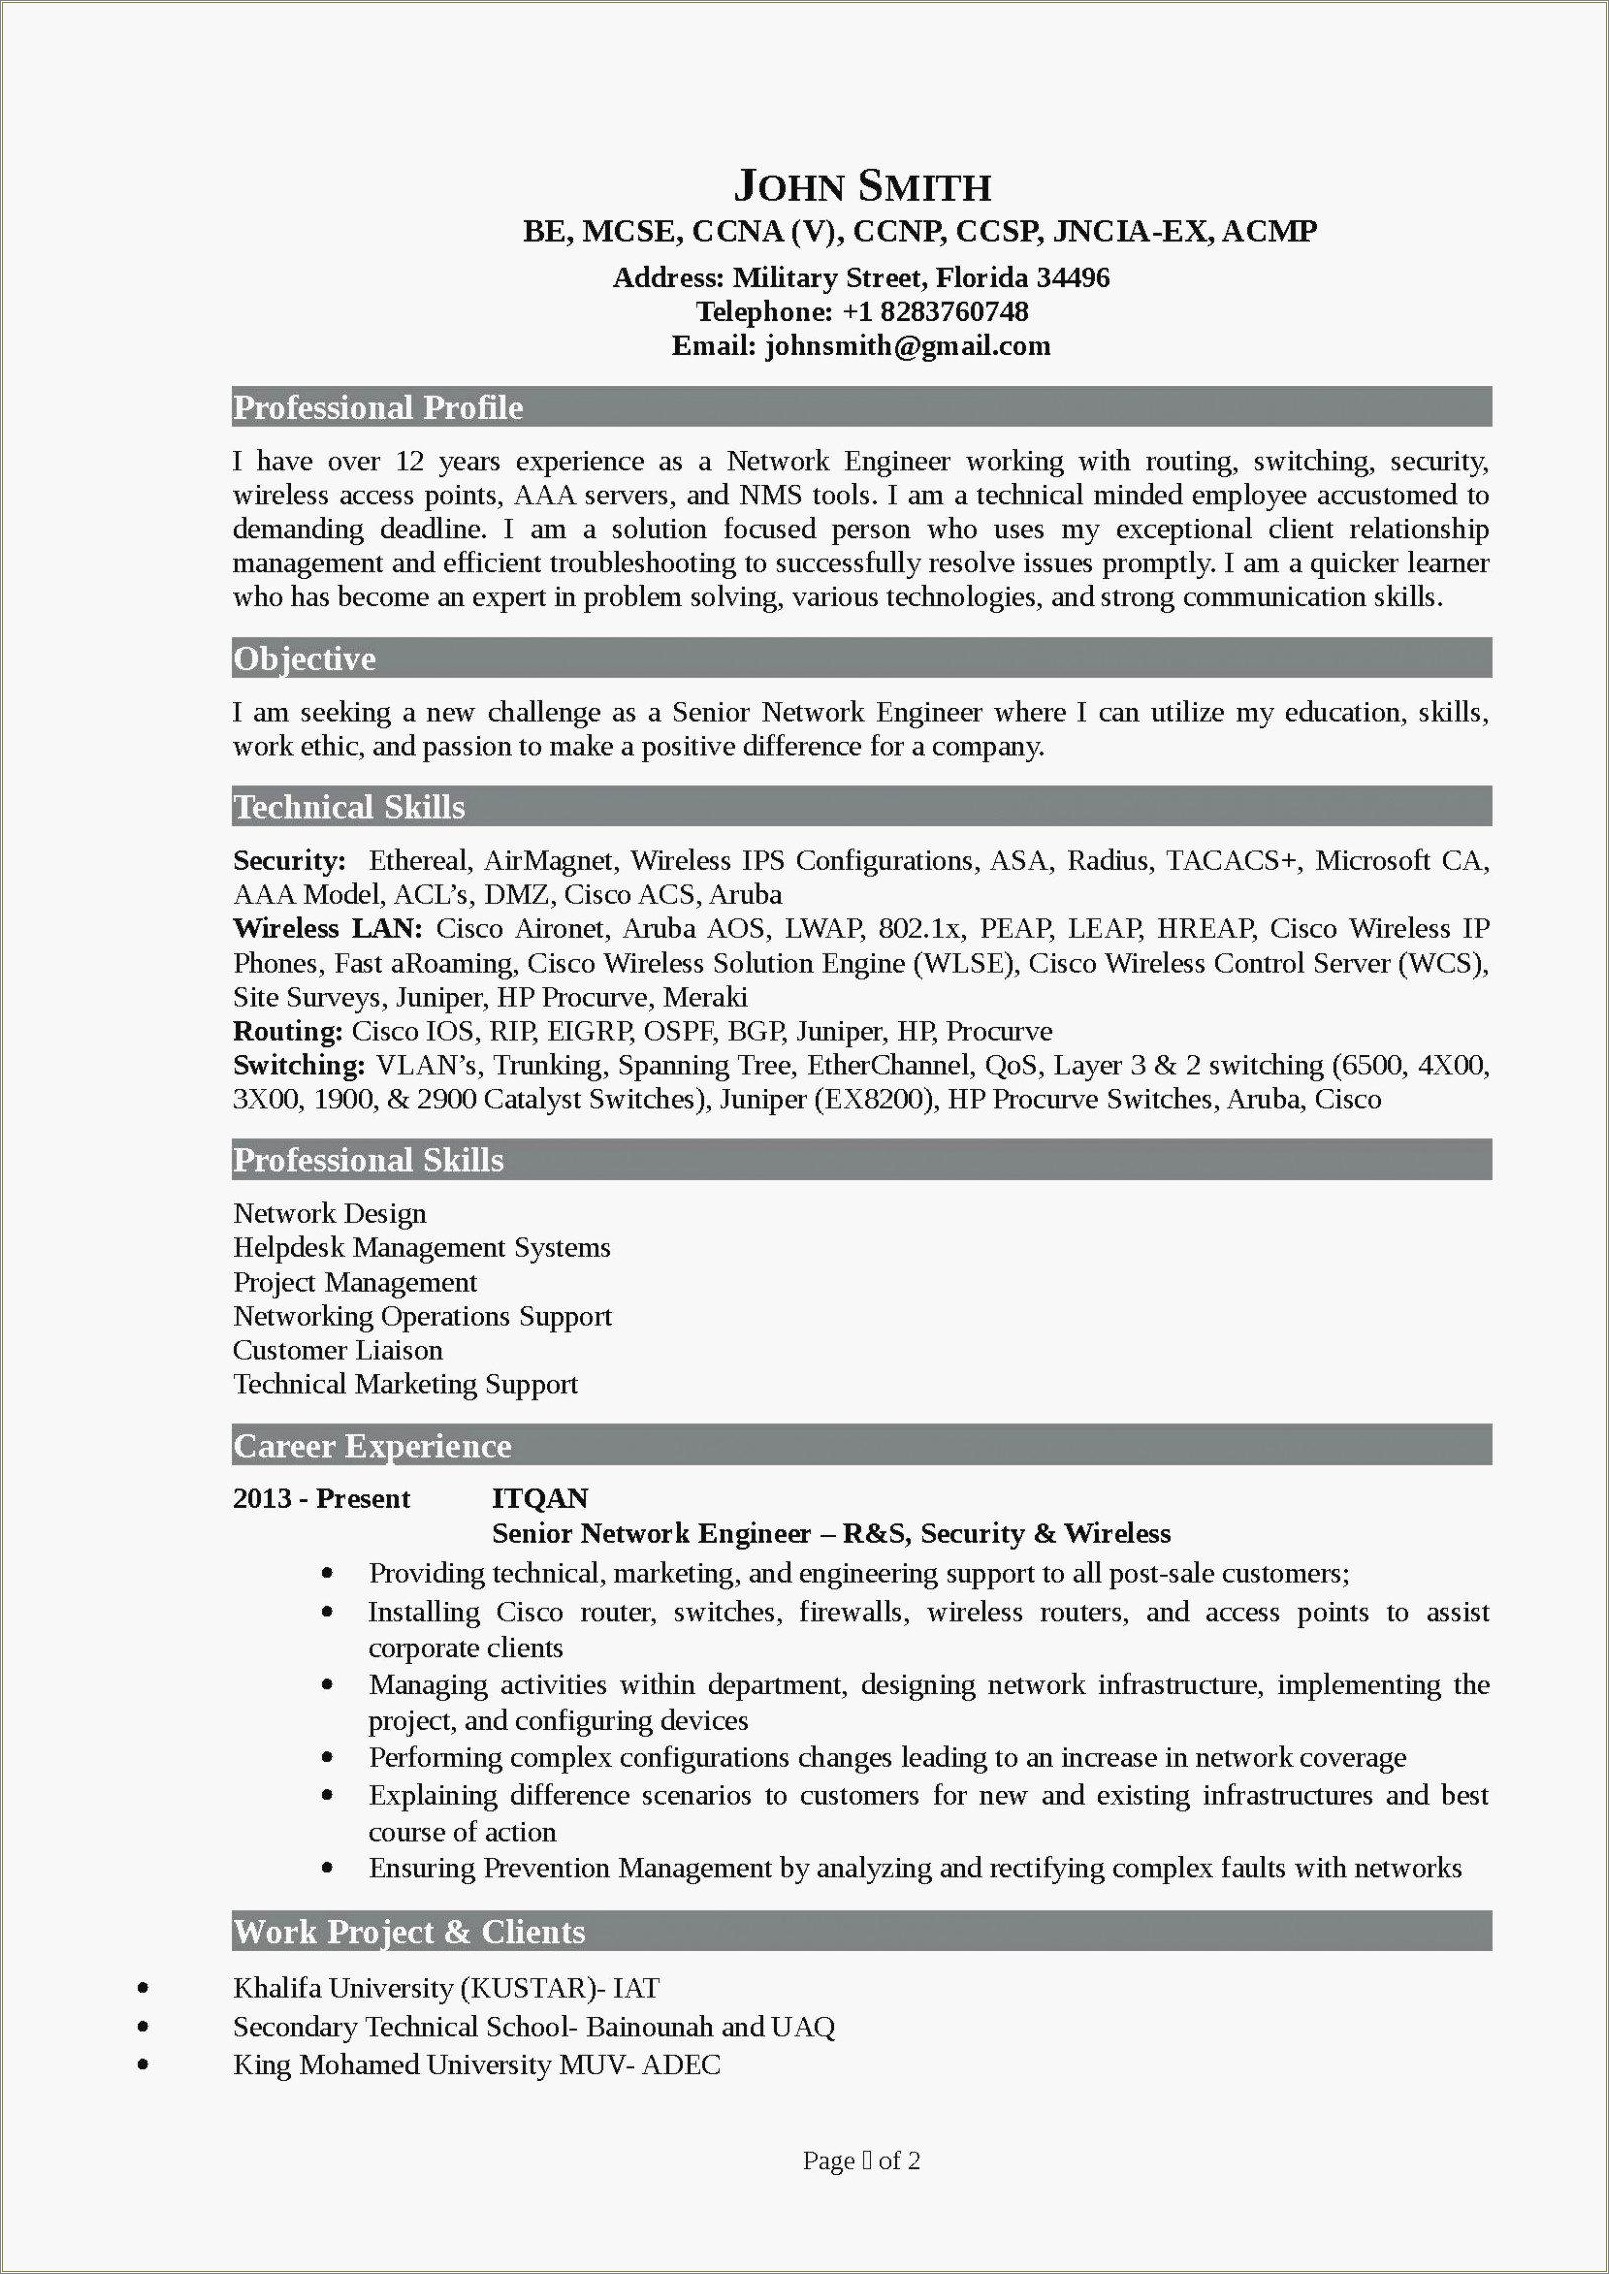 Ccna Certified Resume Sample Free Download - Resume Example Gallery